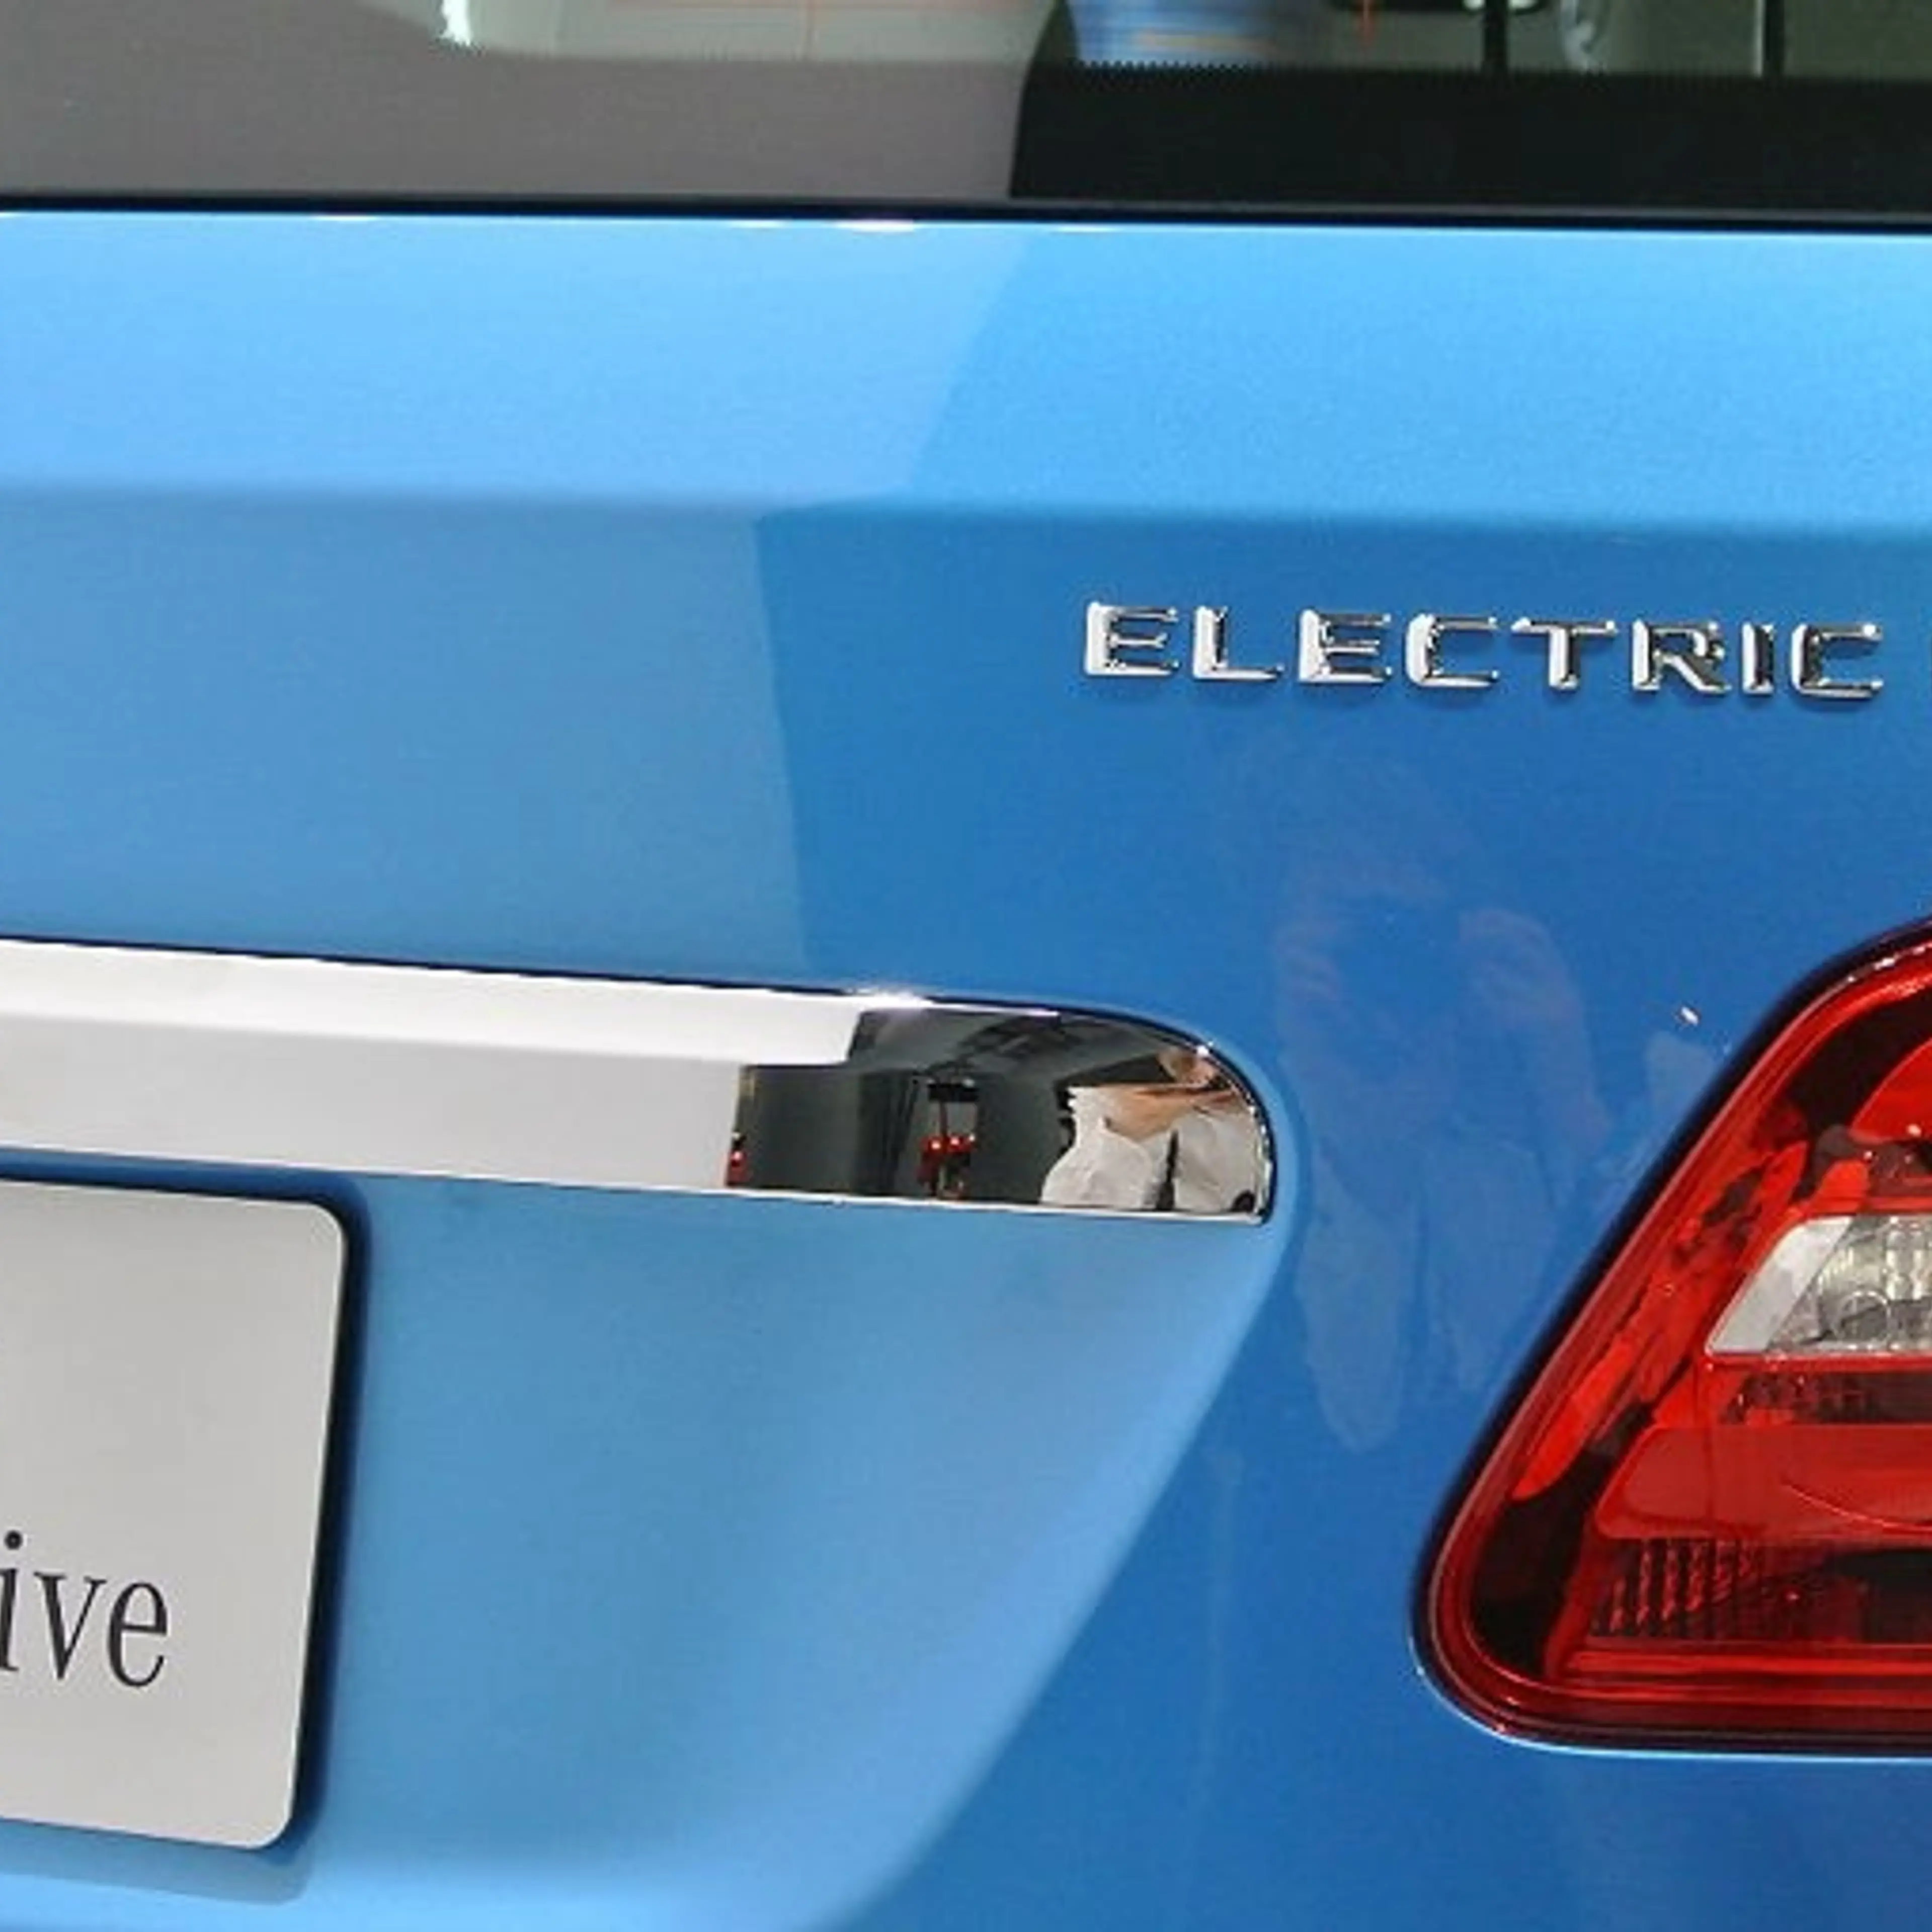 Mercedes-Benz India seeks long-term policy commitment for electric mobility